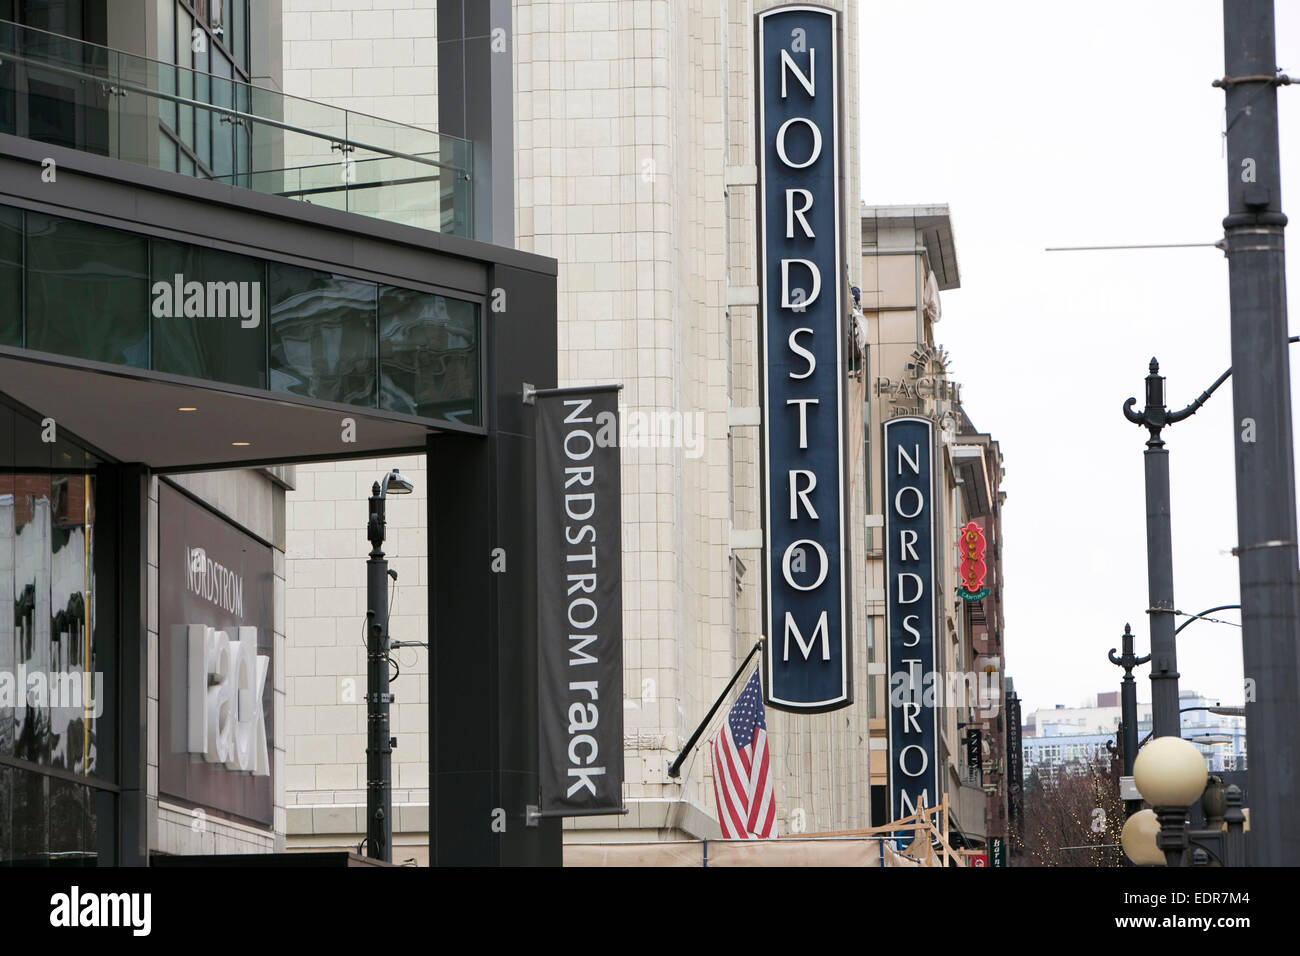 A Nordstrom and Nordstrom Rack clothing retail store in downtown Seattle, Washington. Stock Photo